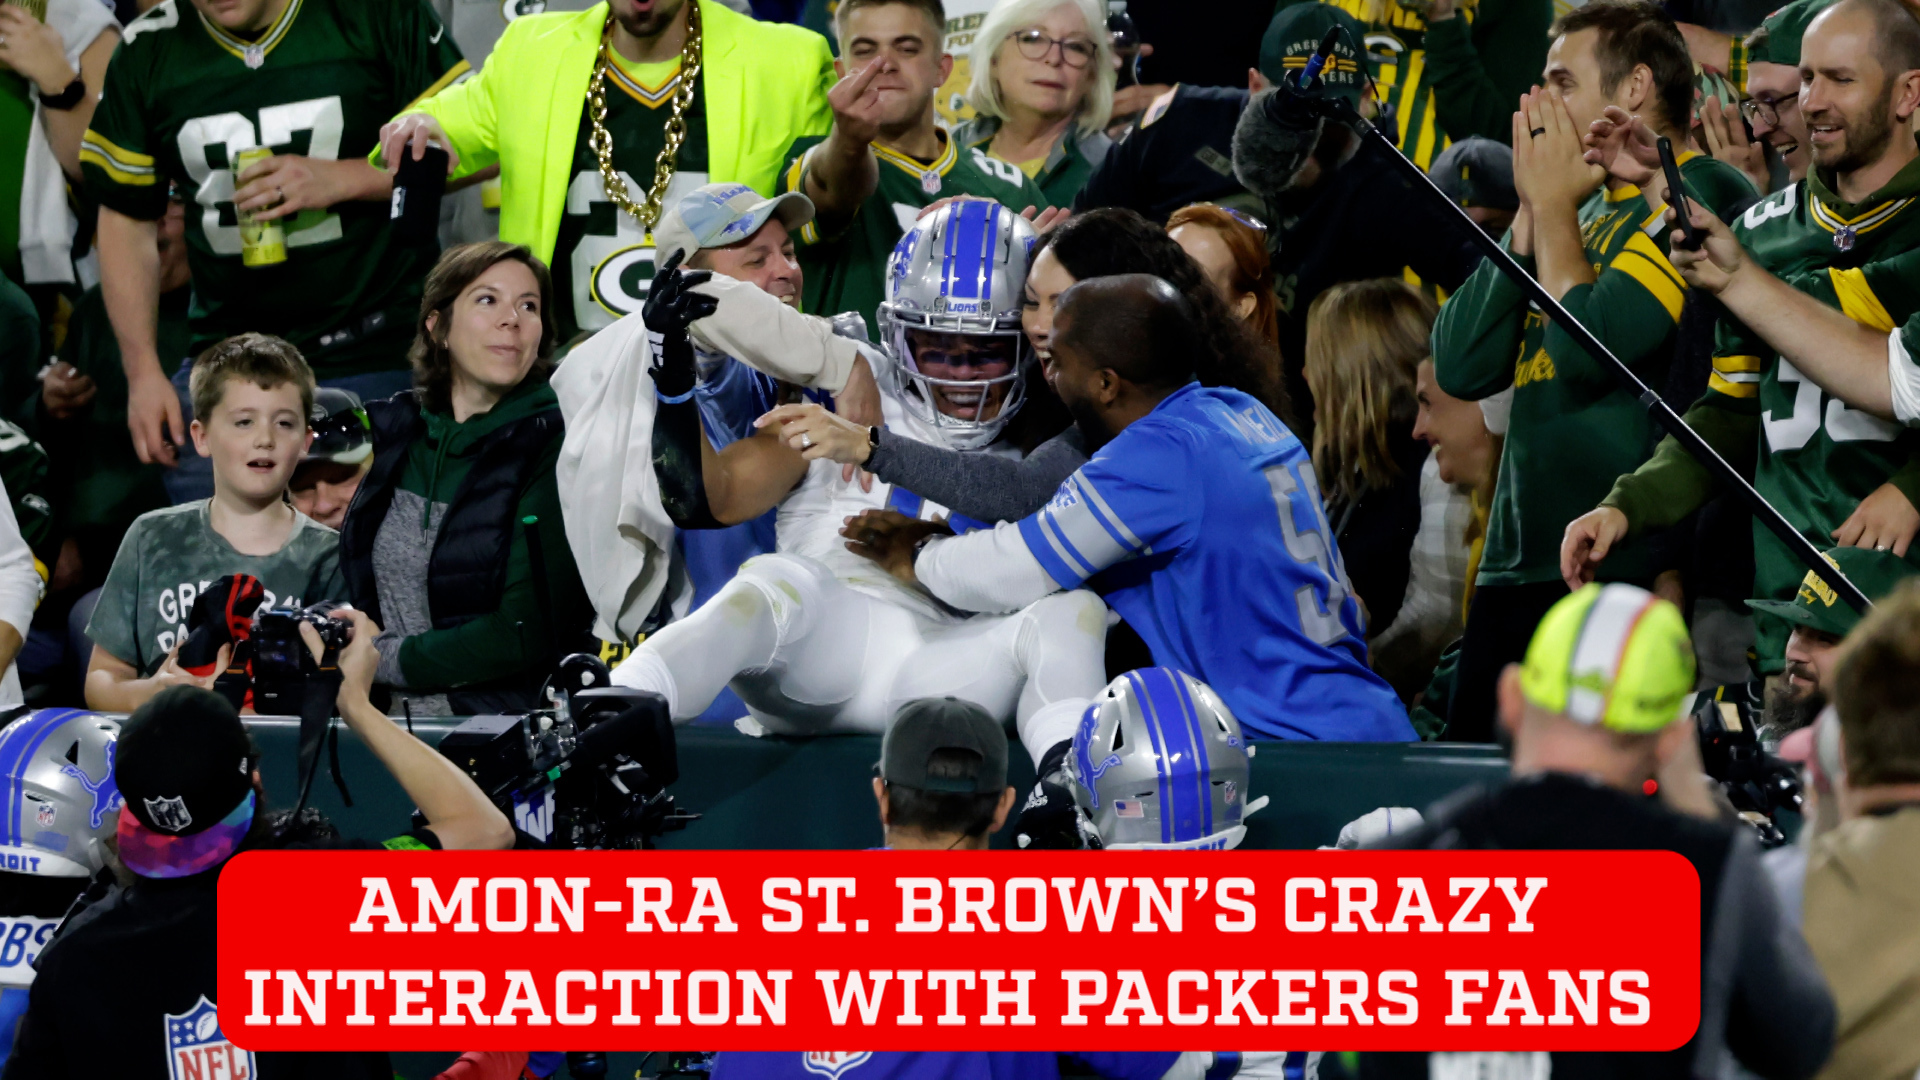 Amon-Ra St. Brown's savage exchange with a Packers fan after scoring decisive touchdown